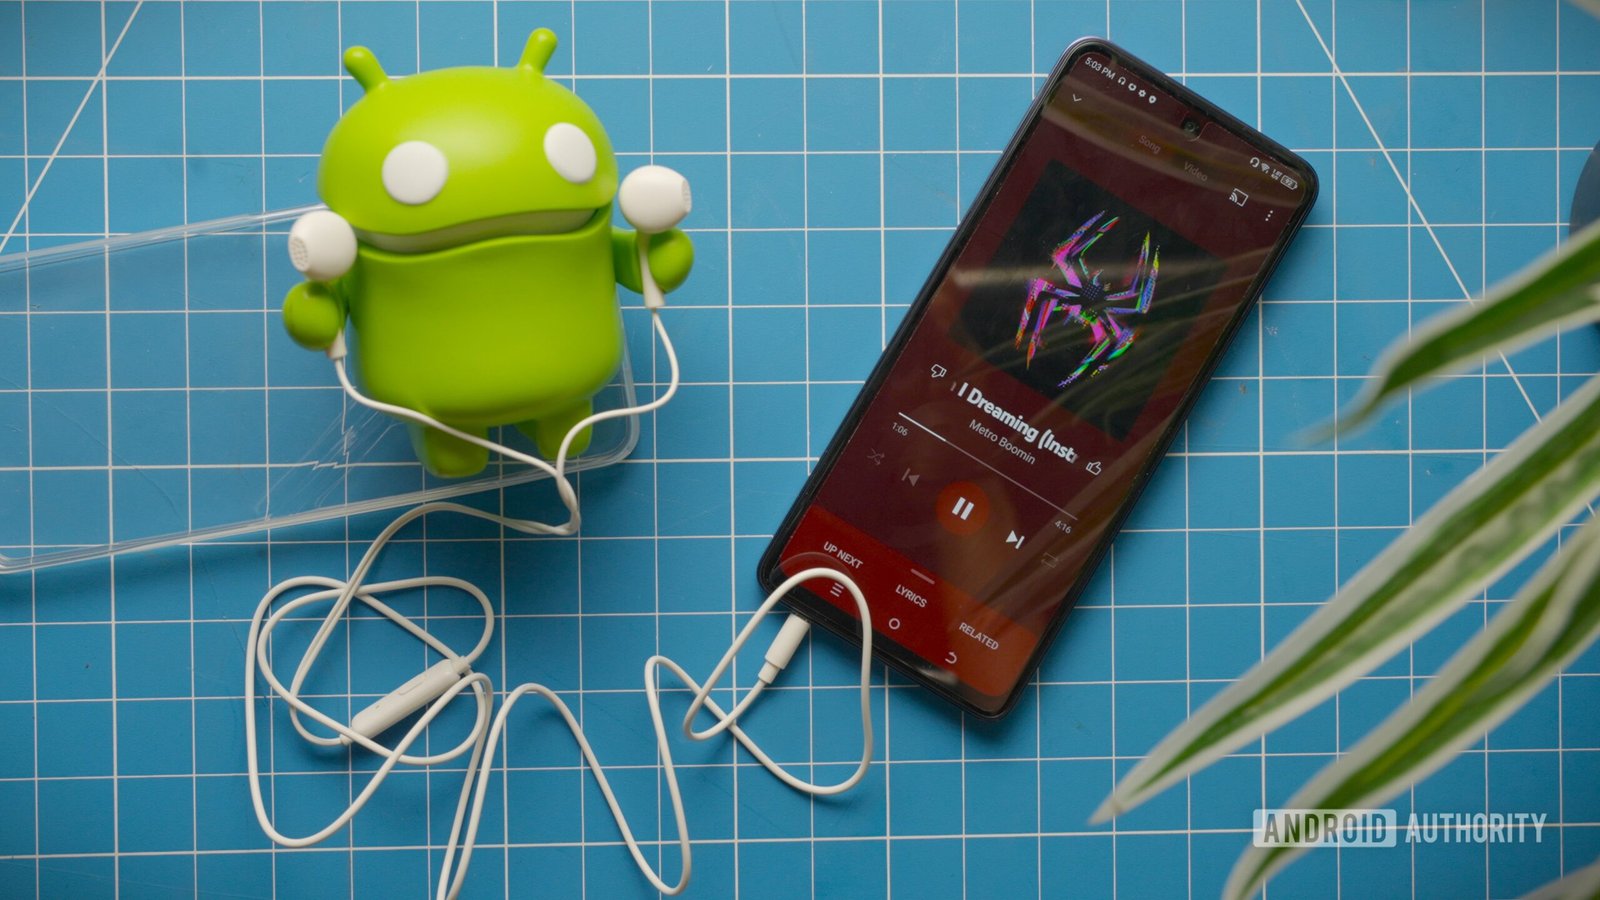 YouTube Music not working? Here’s how you can try to fix it